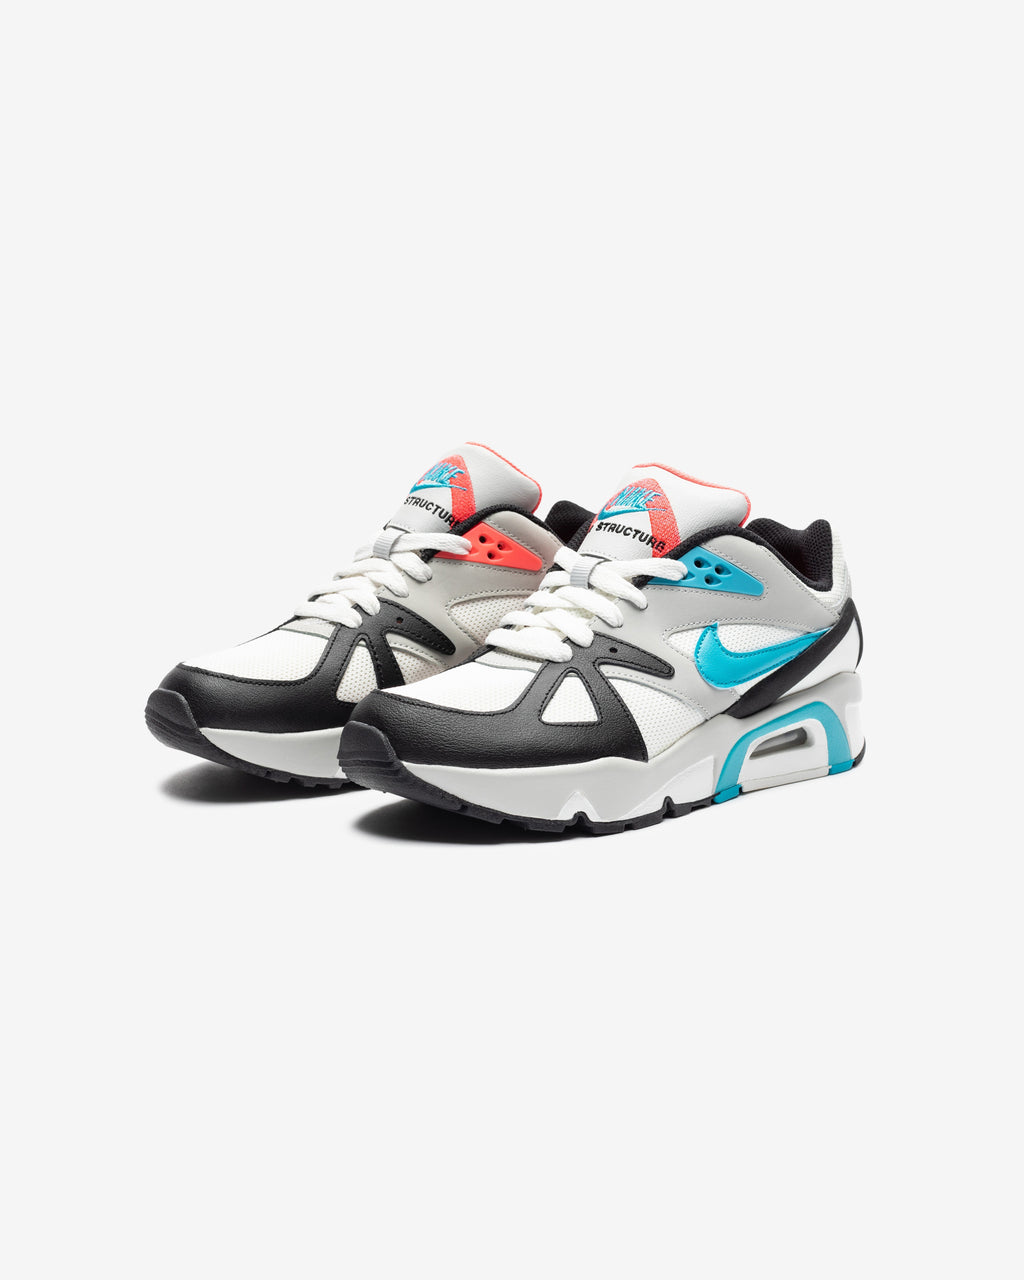 NIKE GS AIR STRUCTURE - SUMMITWHITE/ NEOTEAL/ BLACK/ INFRARED